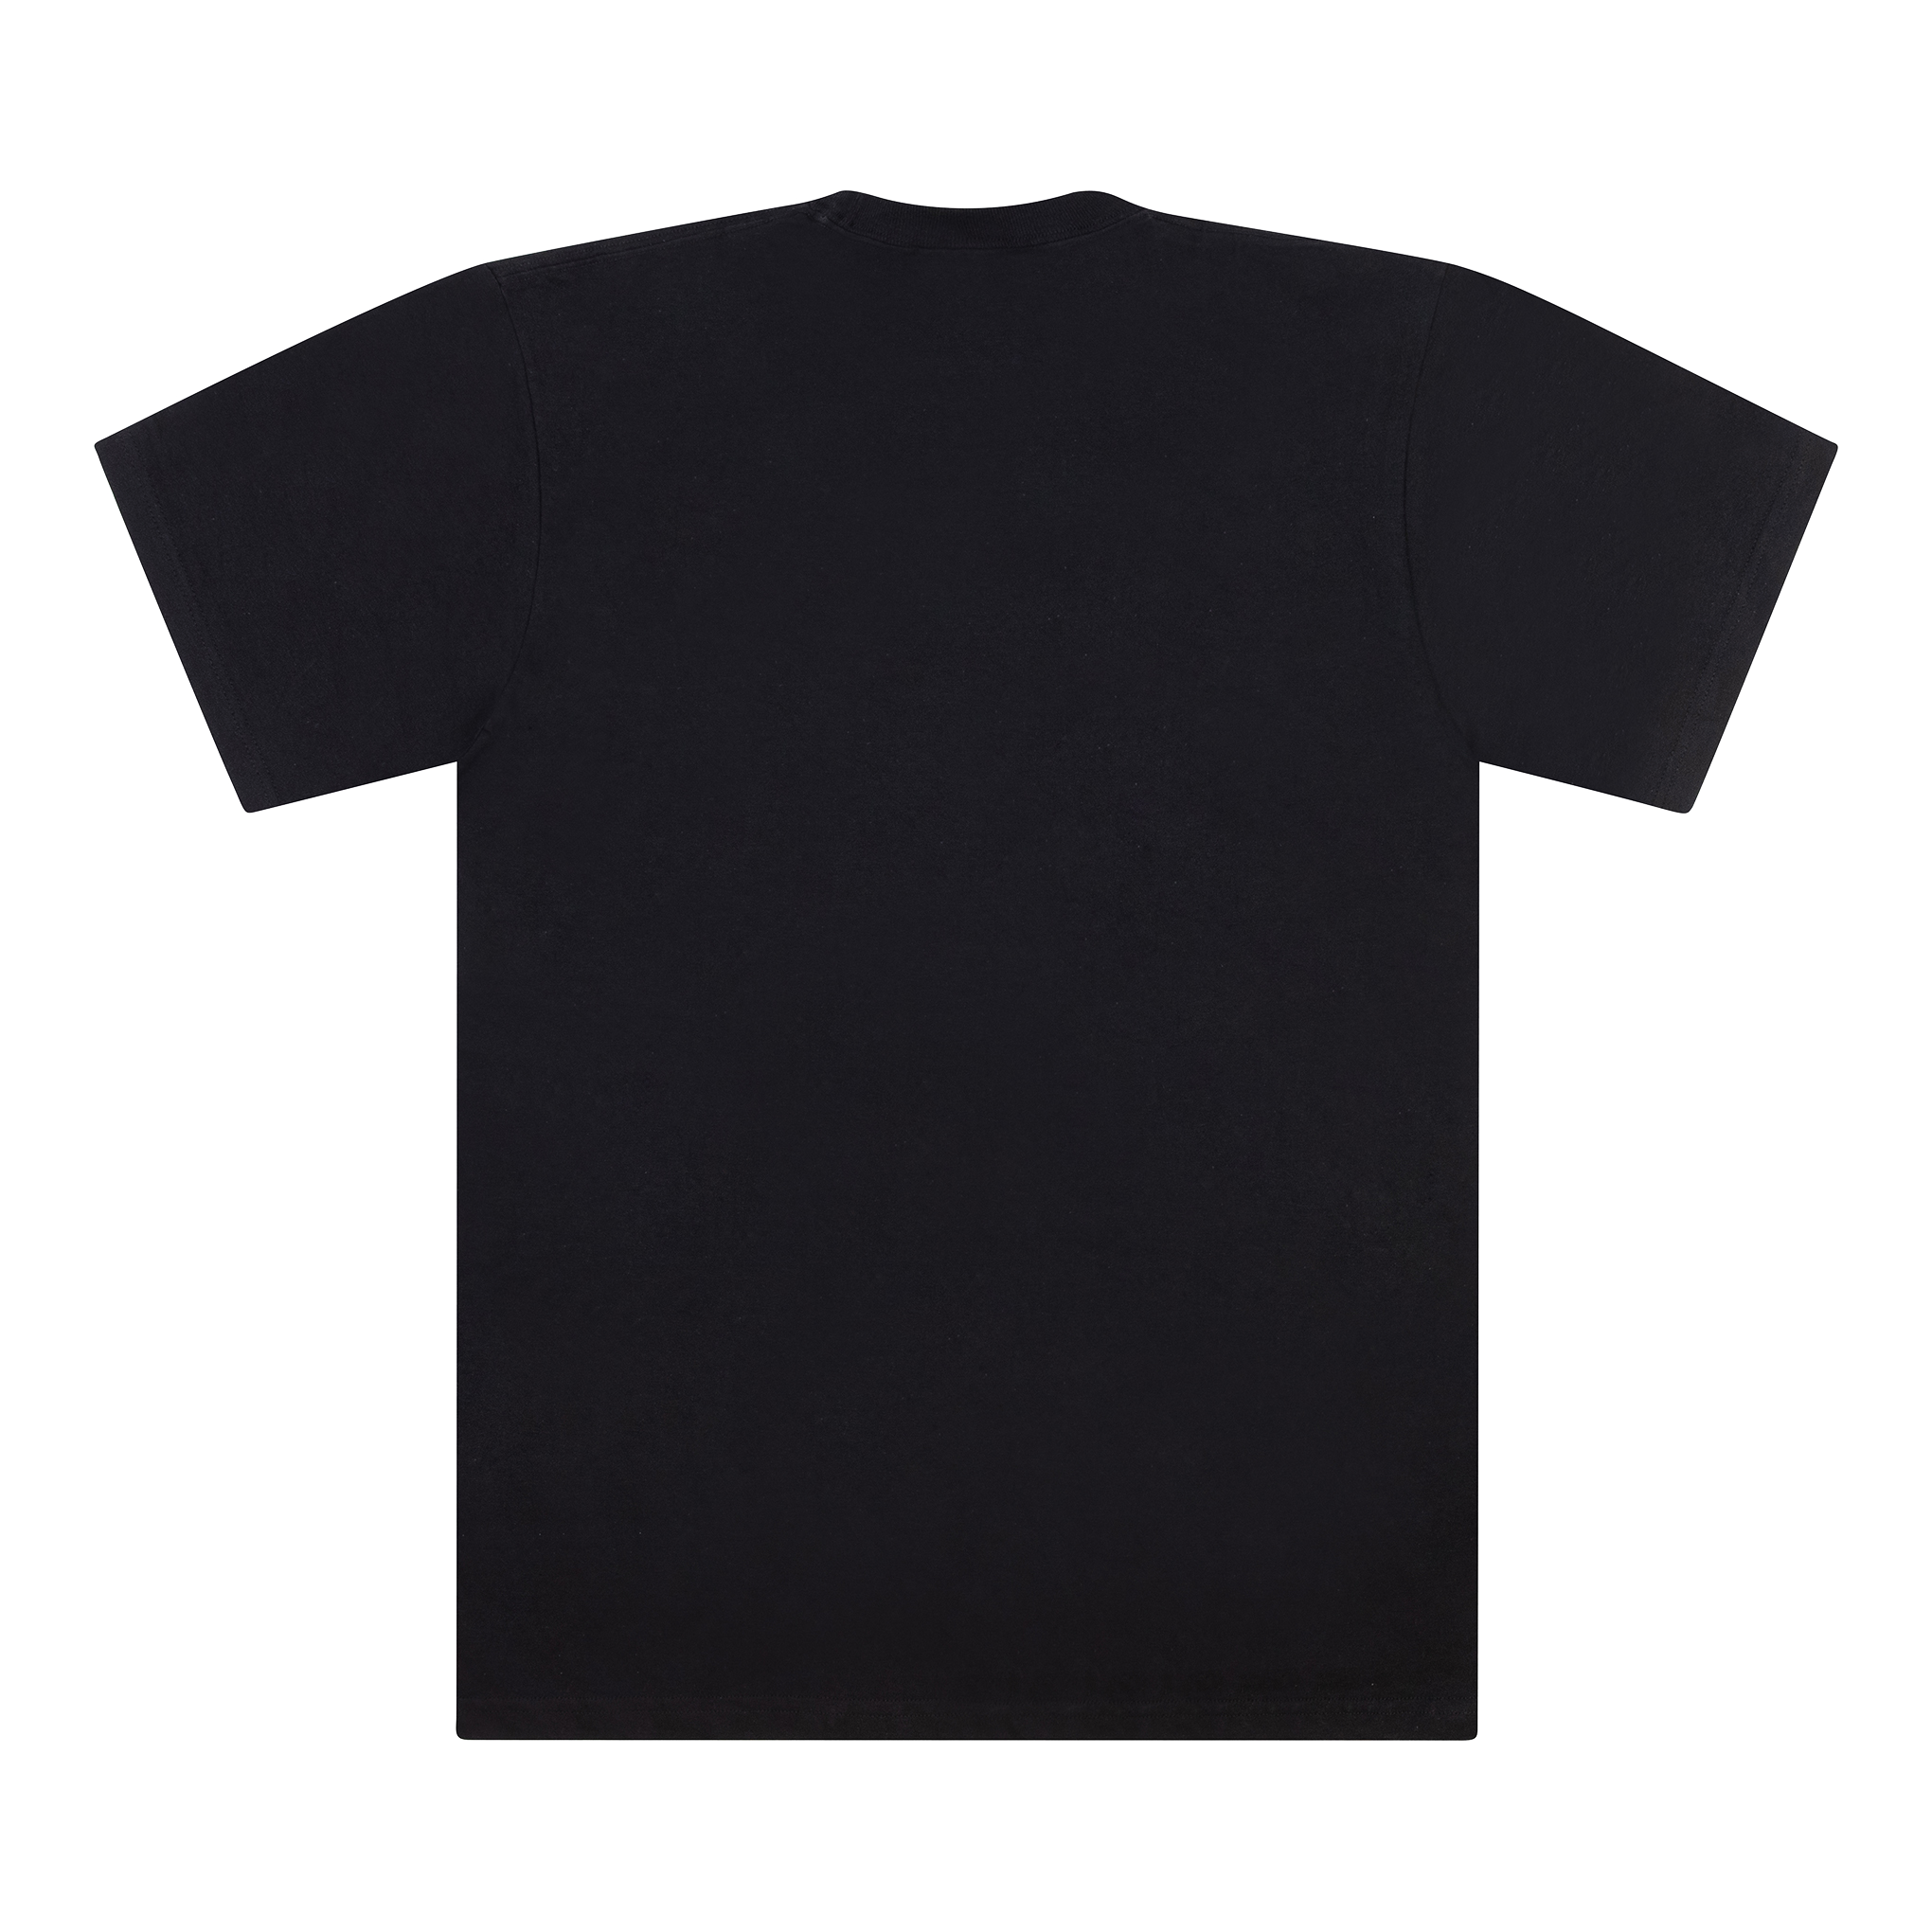 SUPREME CONNECTED TEE BLACK